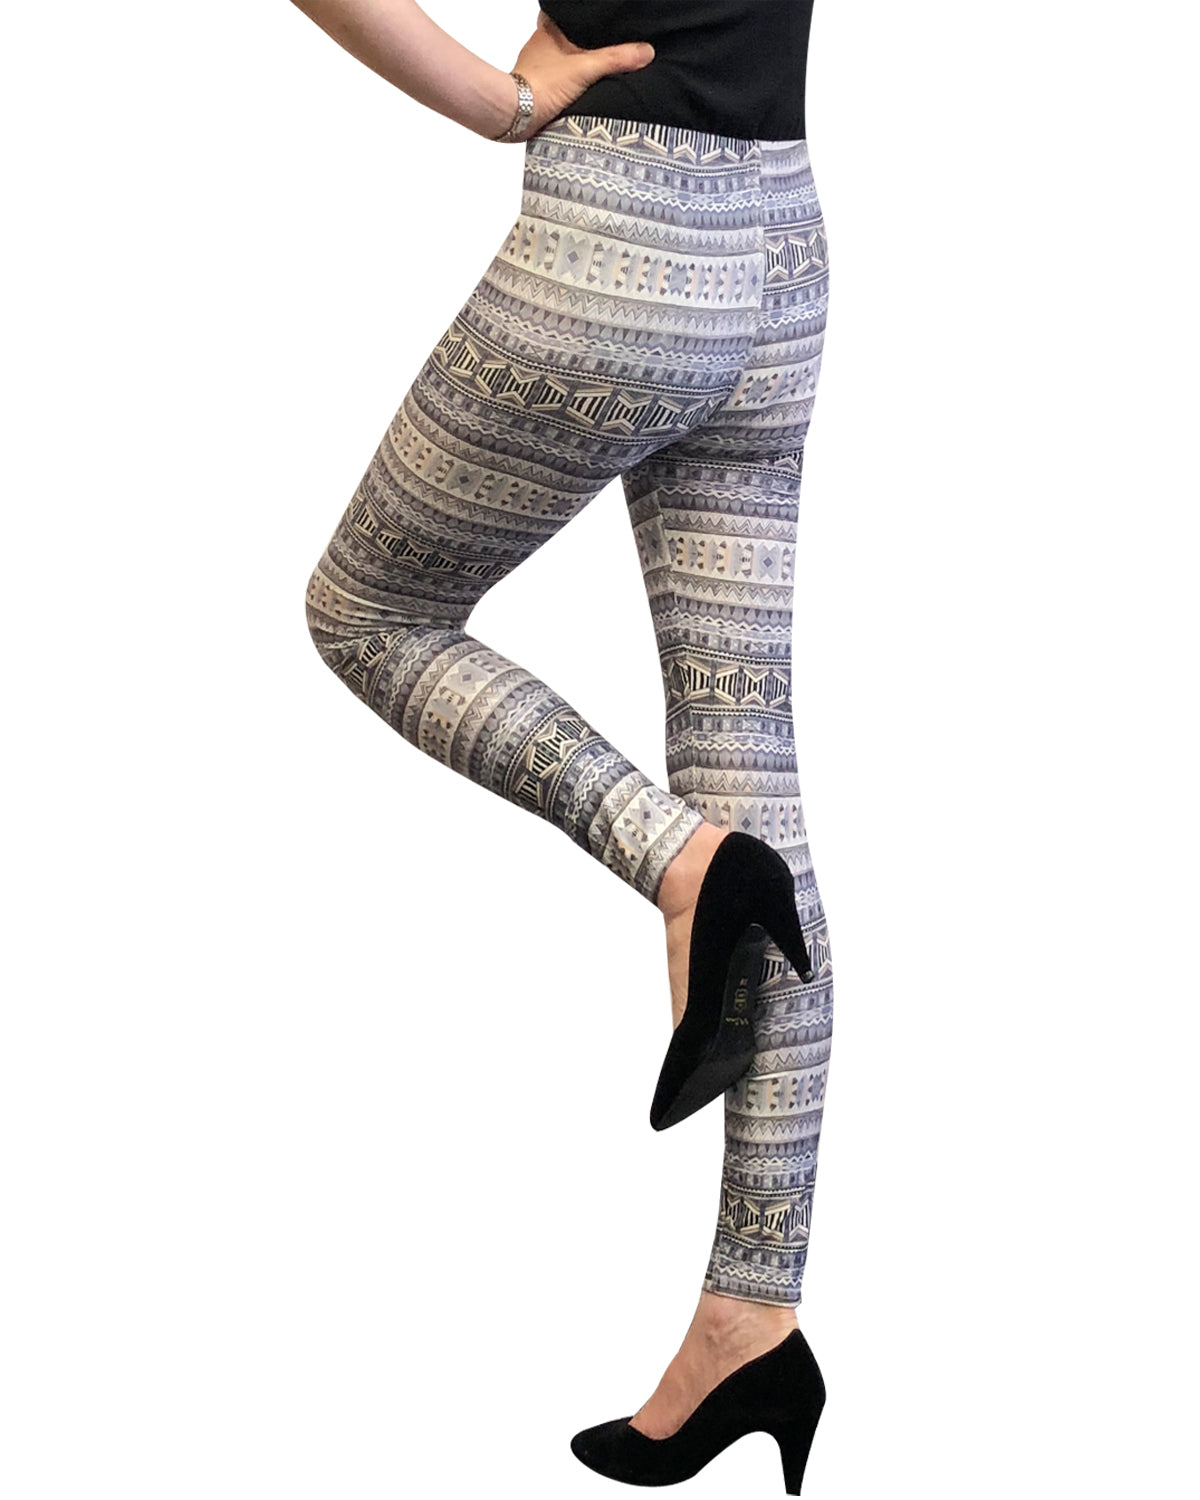 WrapablesÂ® Womenâ€™s Ultra-Soft and Stretchy Printed Leggings for Activewear and Workout